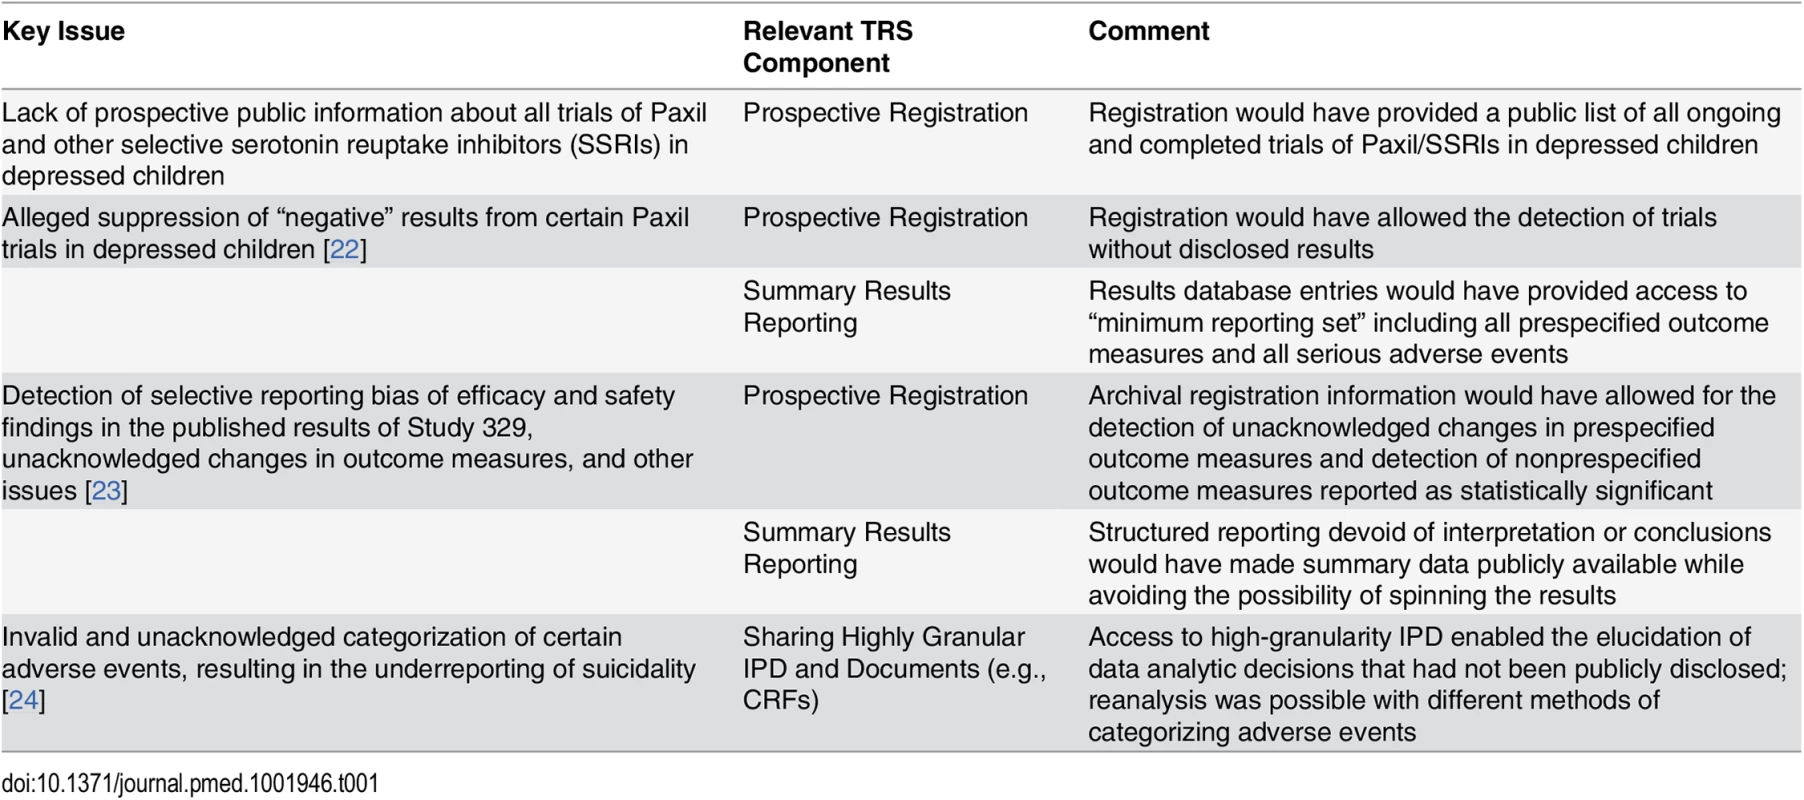 Key issues with trials of antidepressant use in children for depression and the role of the TRS.